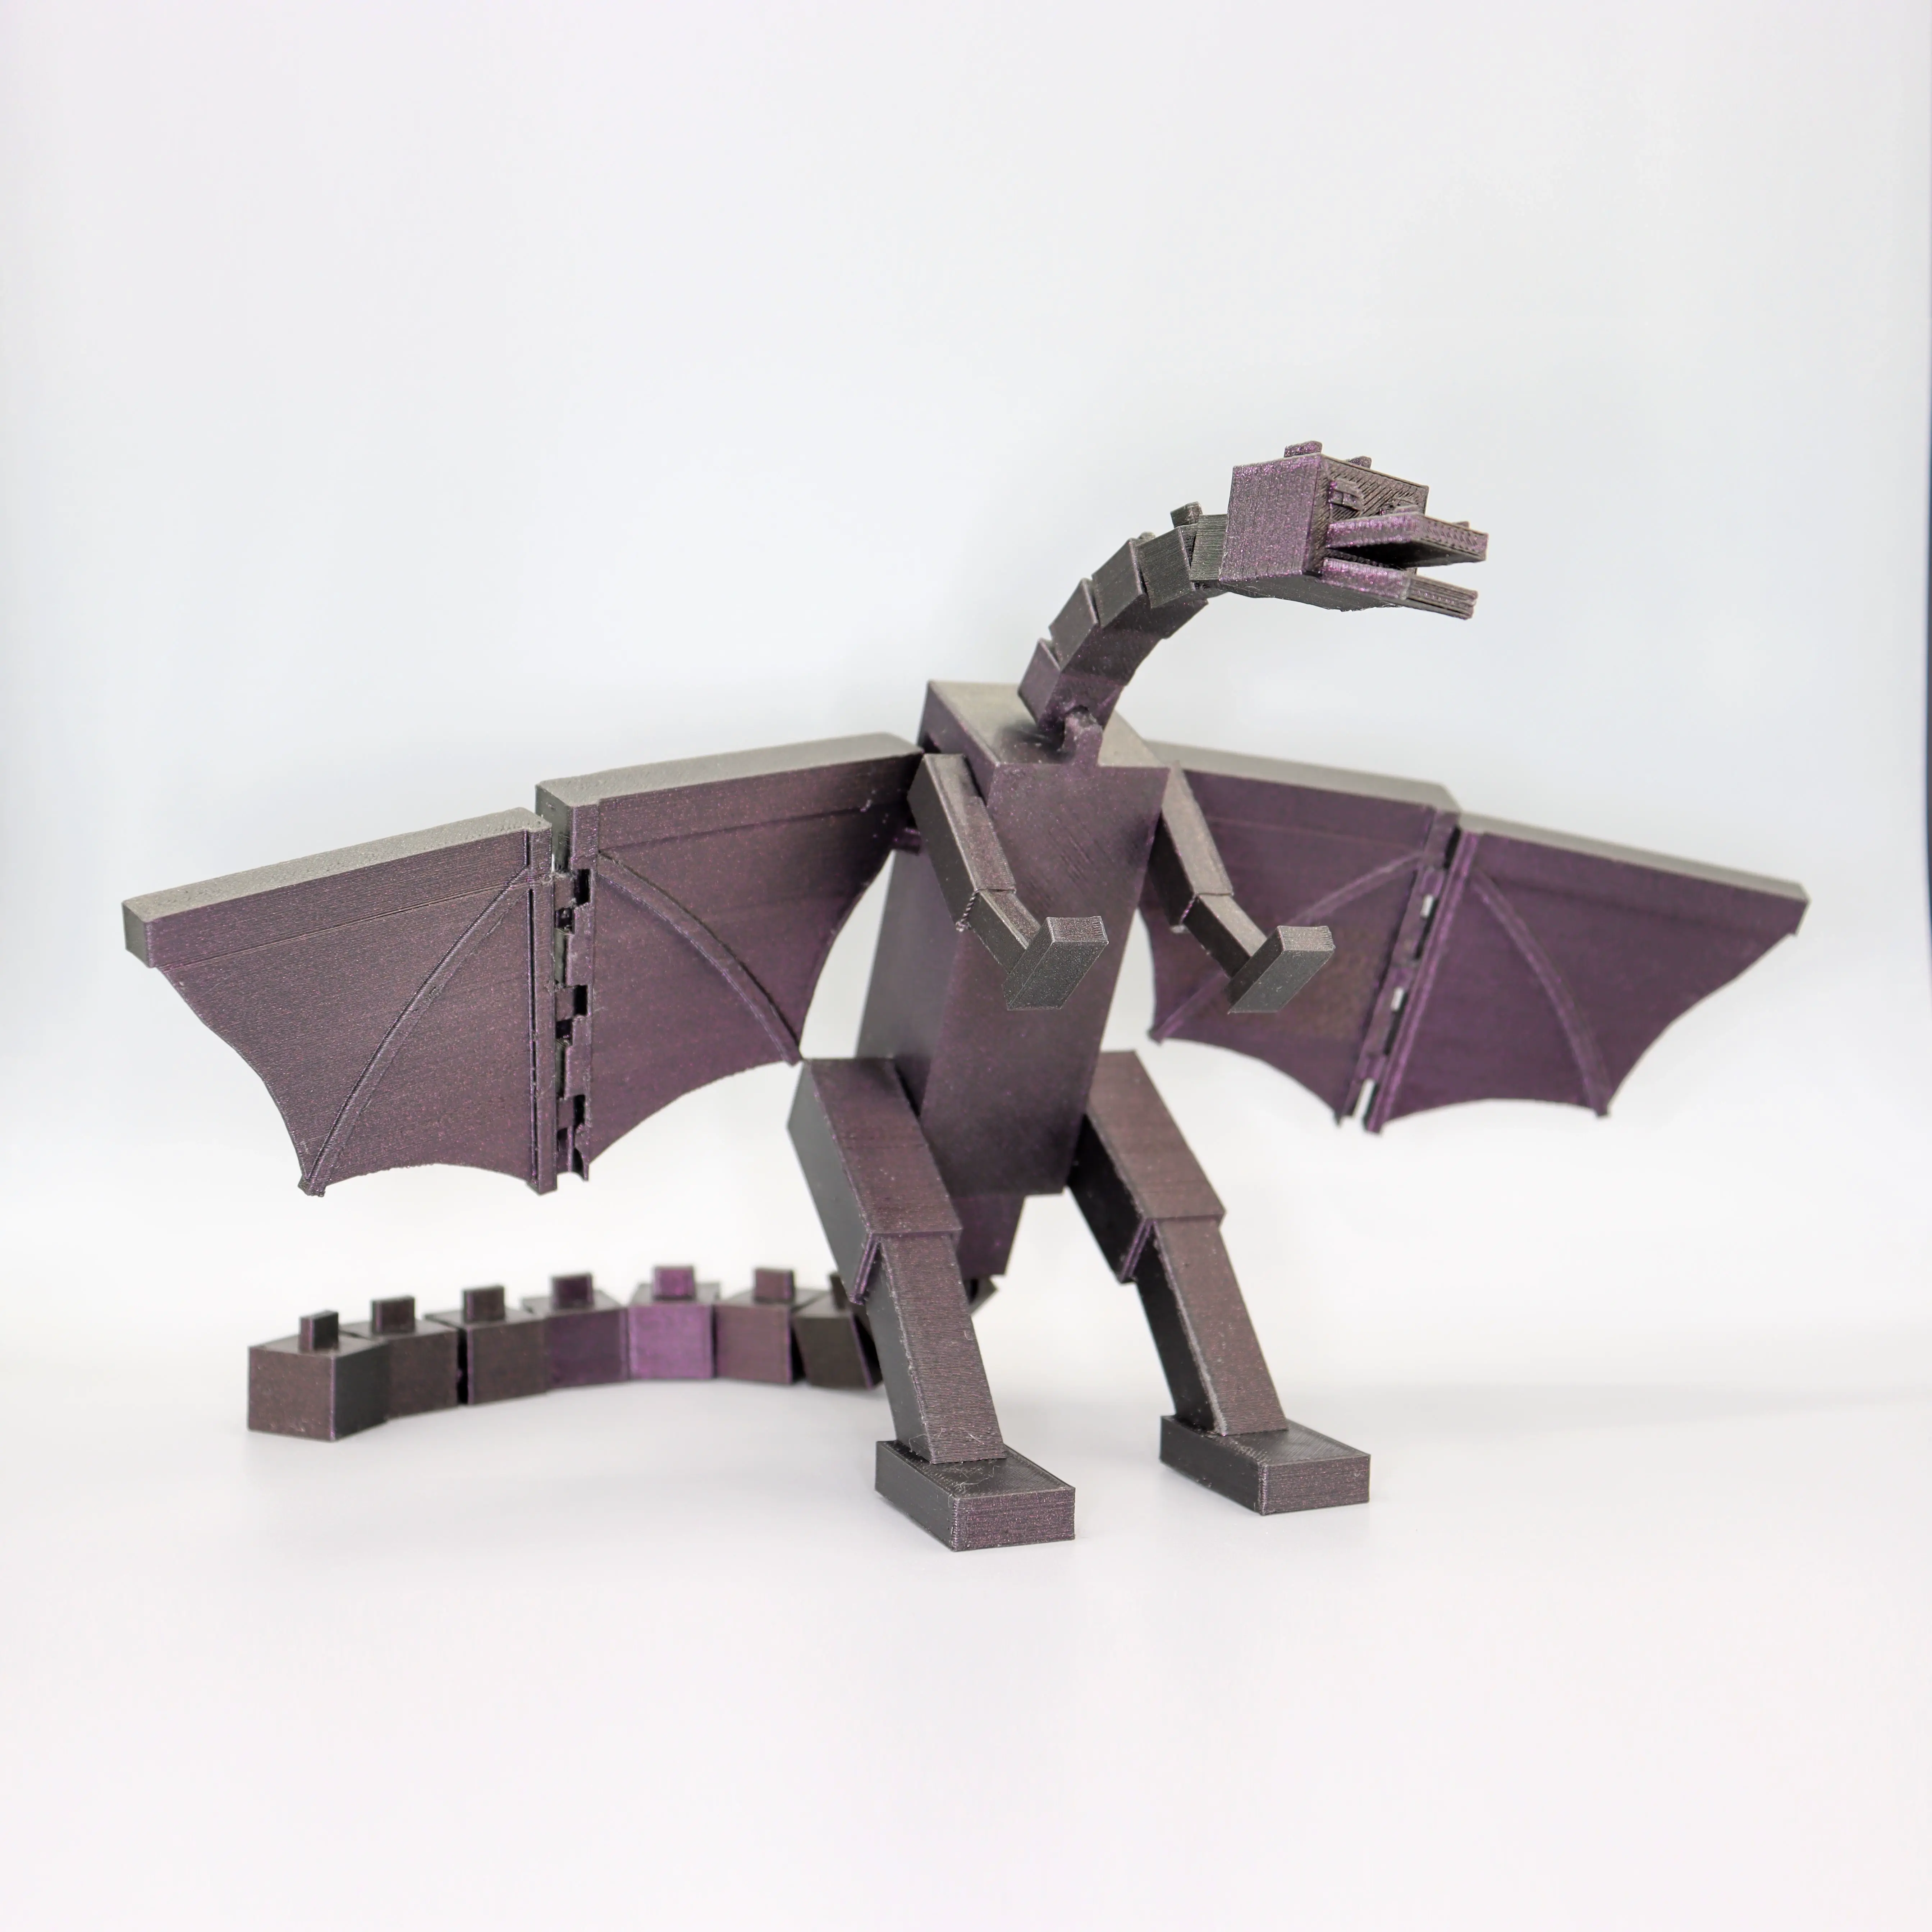 Ender dragon fully articulated